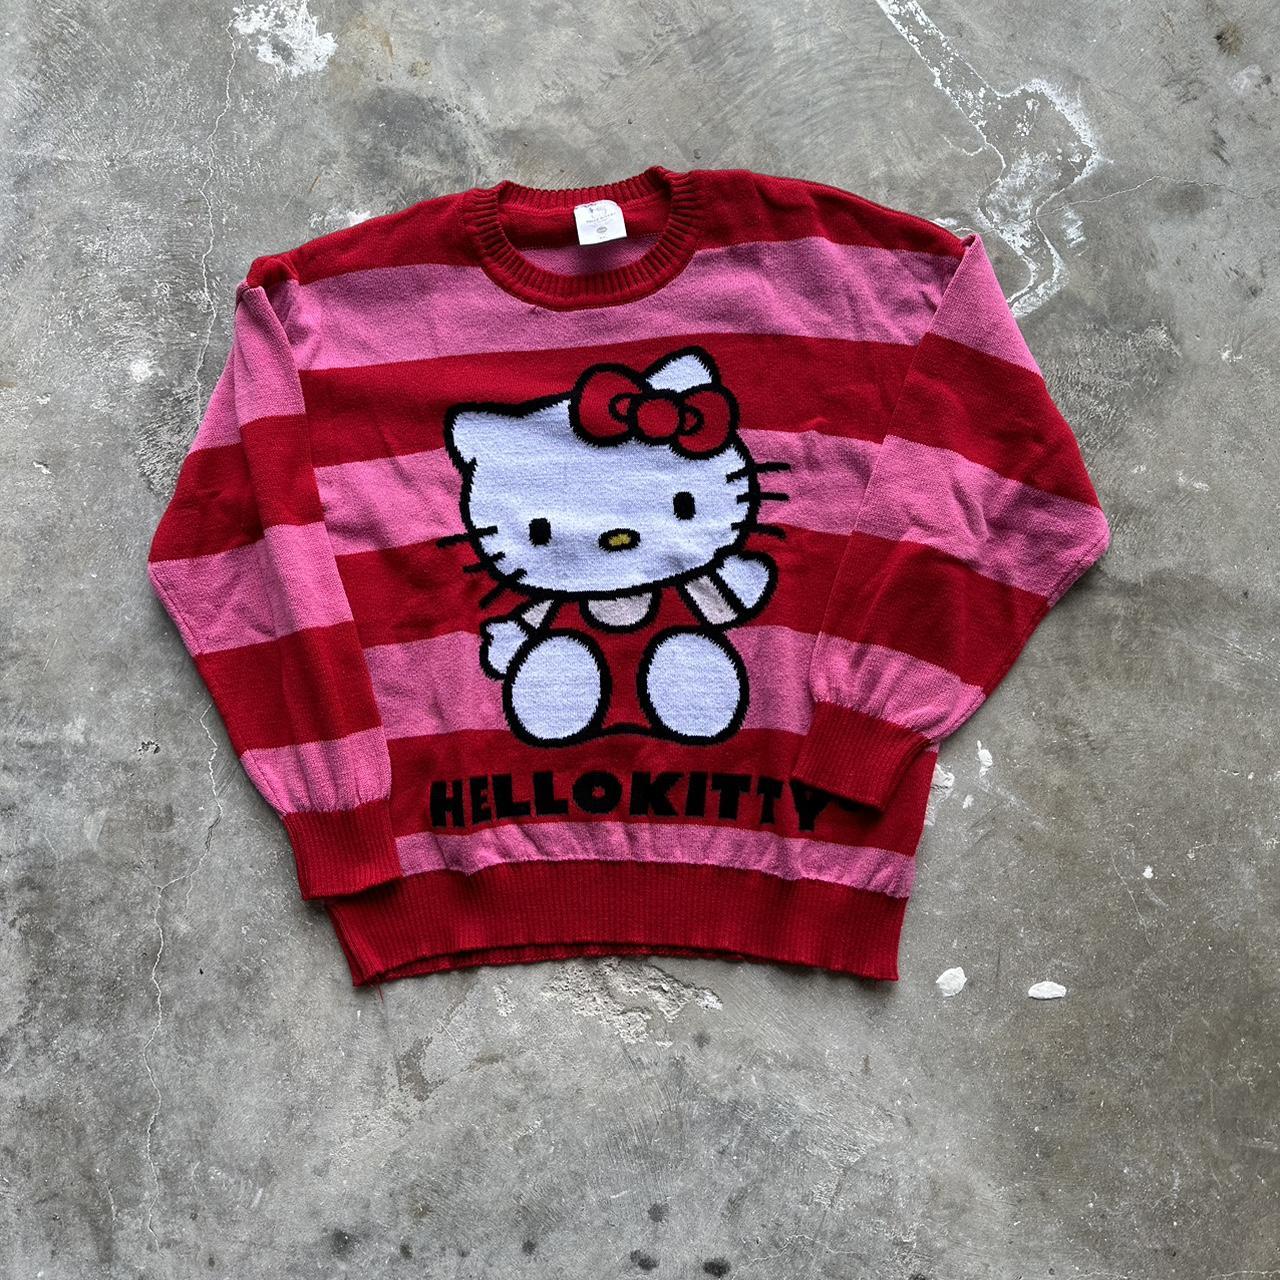 Y2k hello kitty sweater super cute and perfect for... - Depop